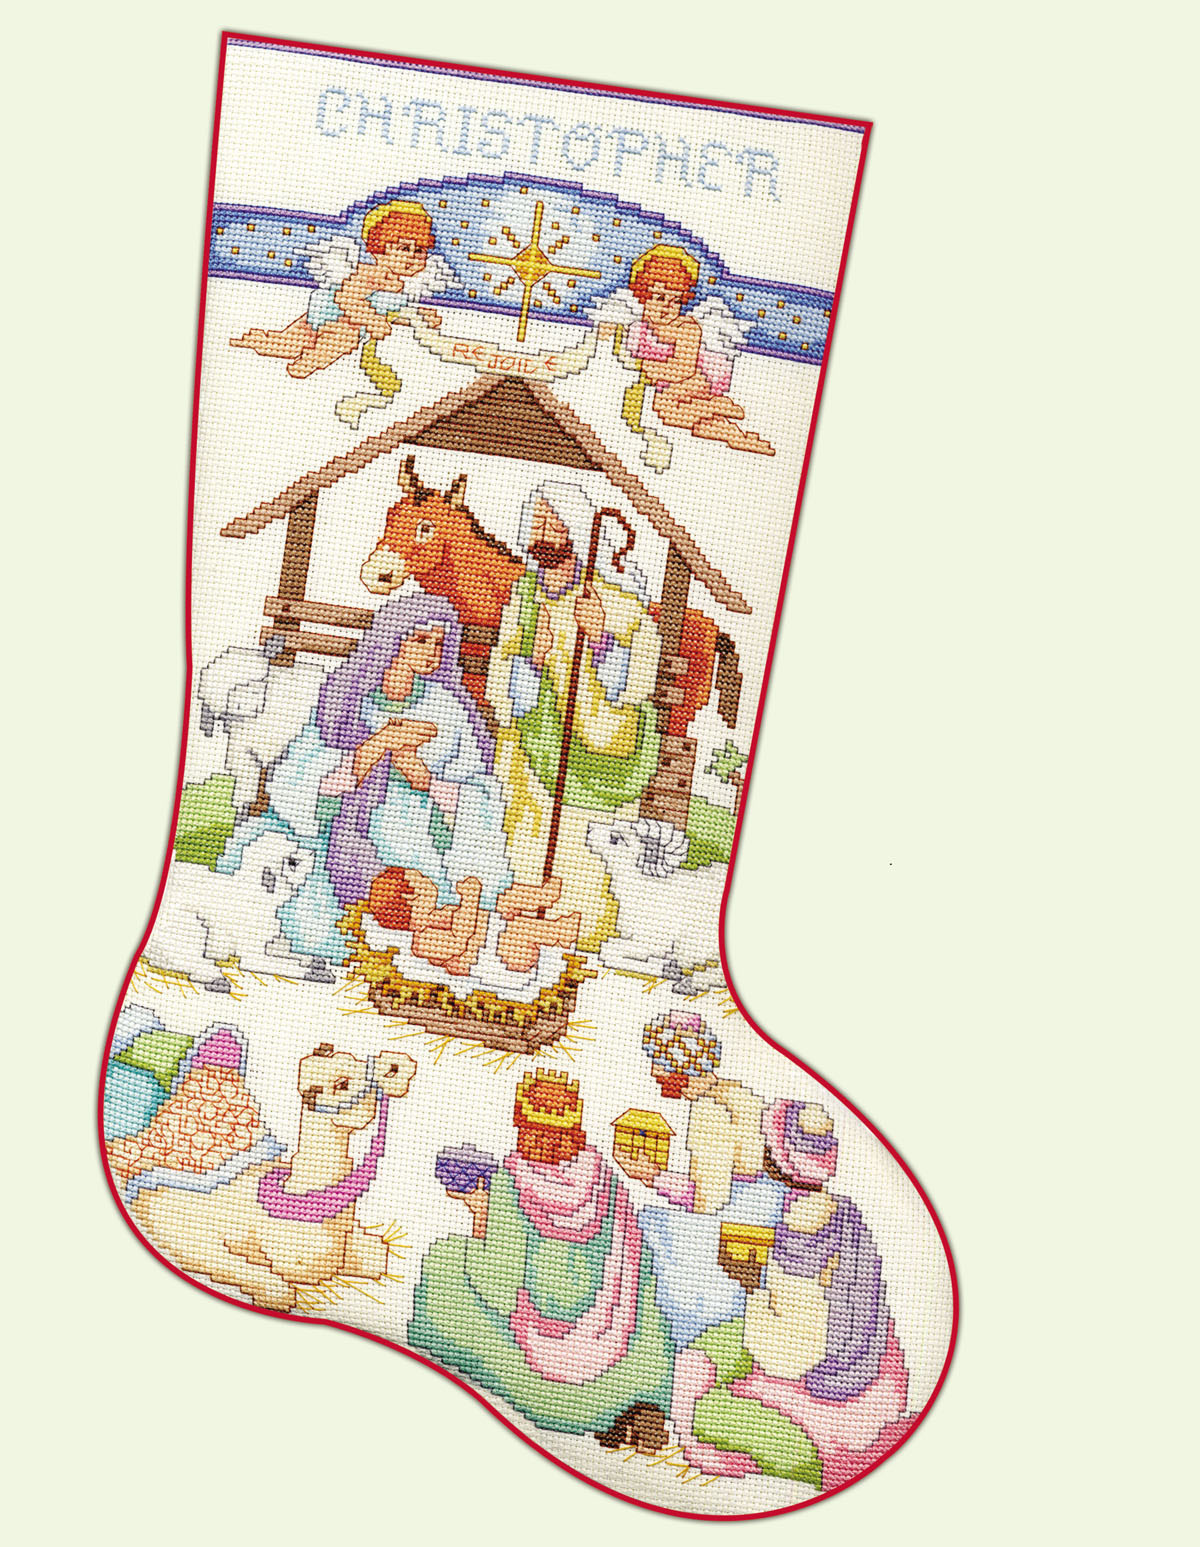 Leisure Arts Donna Kooler's Ultimate Stocking Collection Up, Up, And Away  Cross Stitch ePattern - Leisure Arts